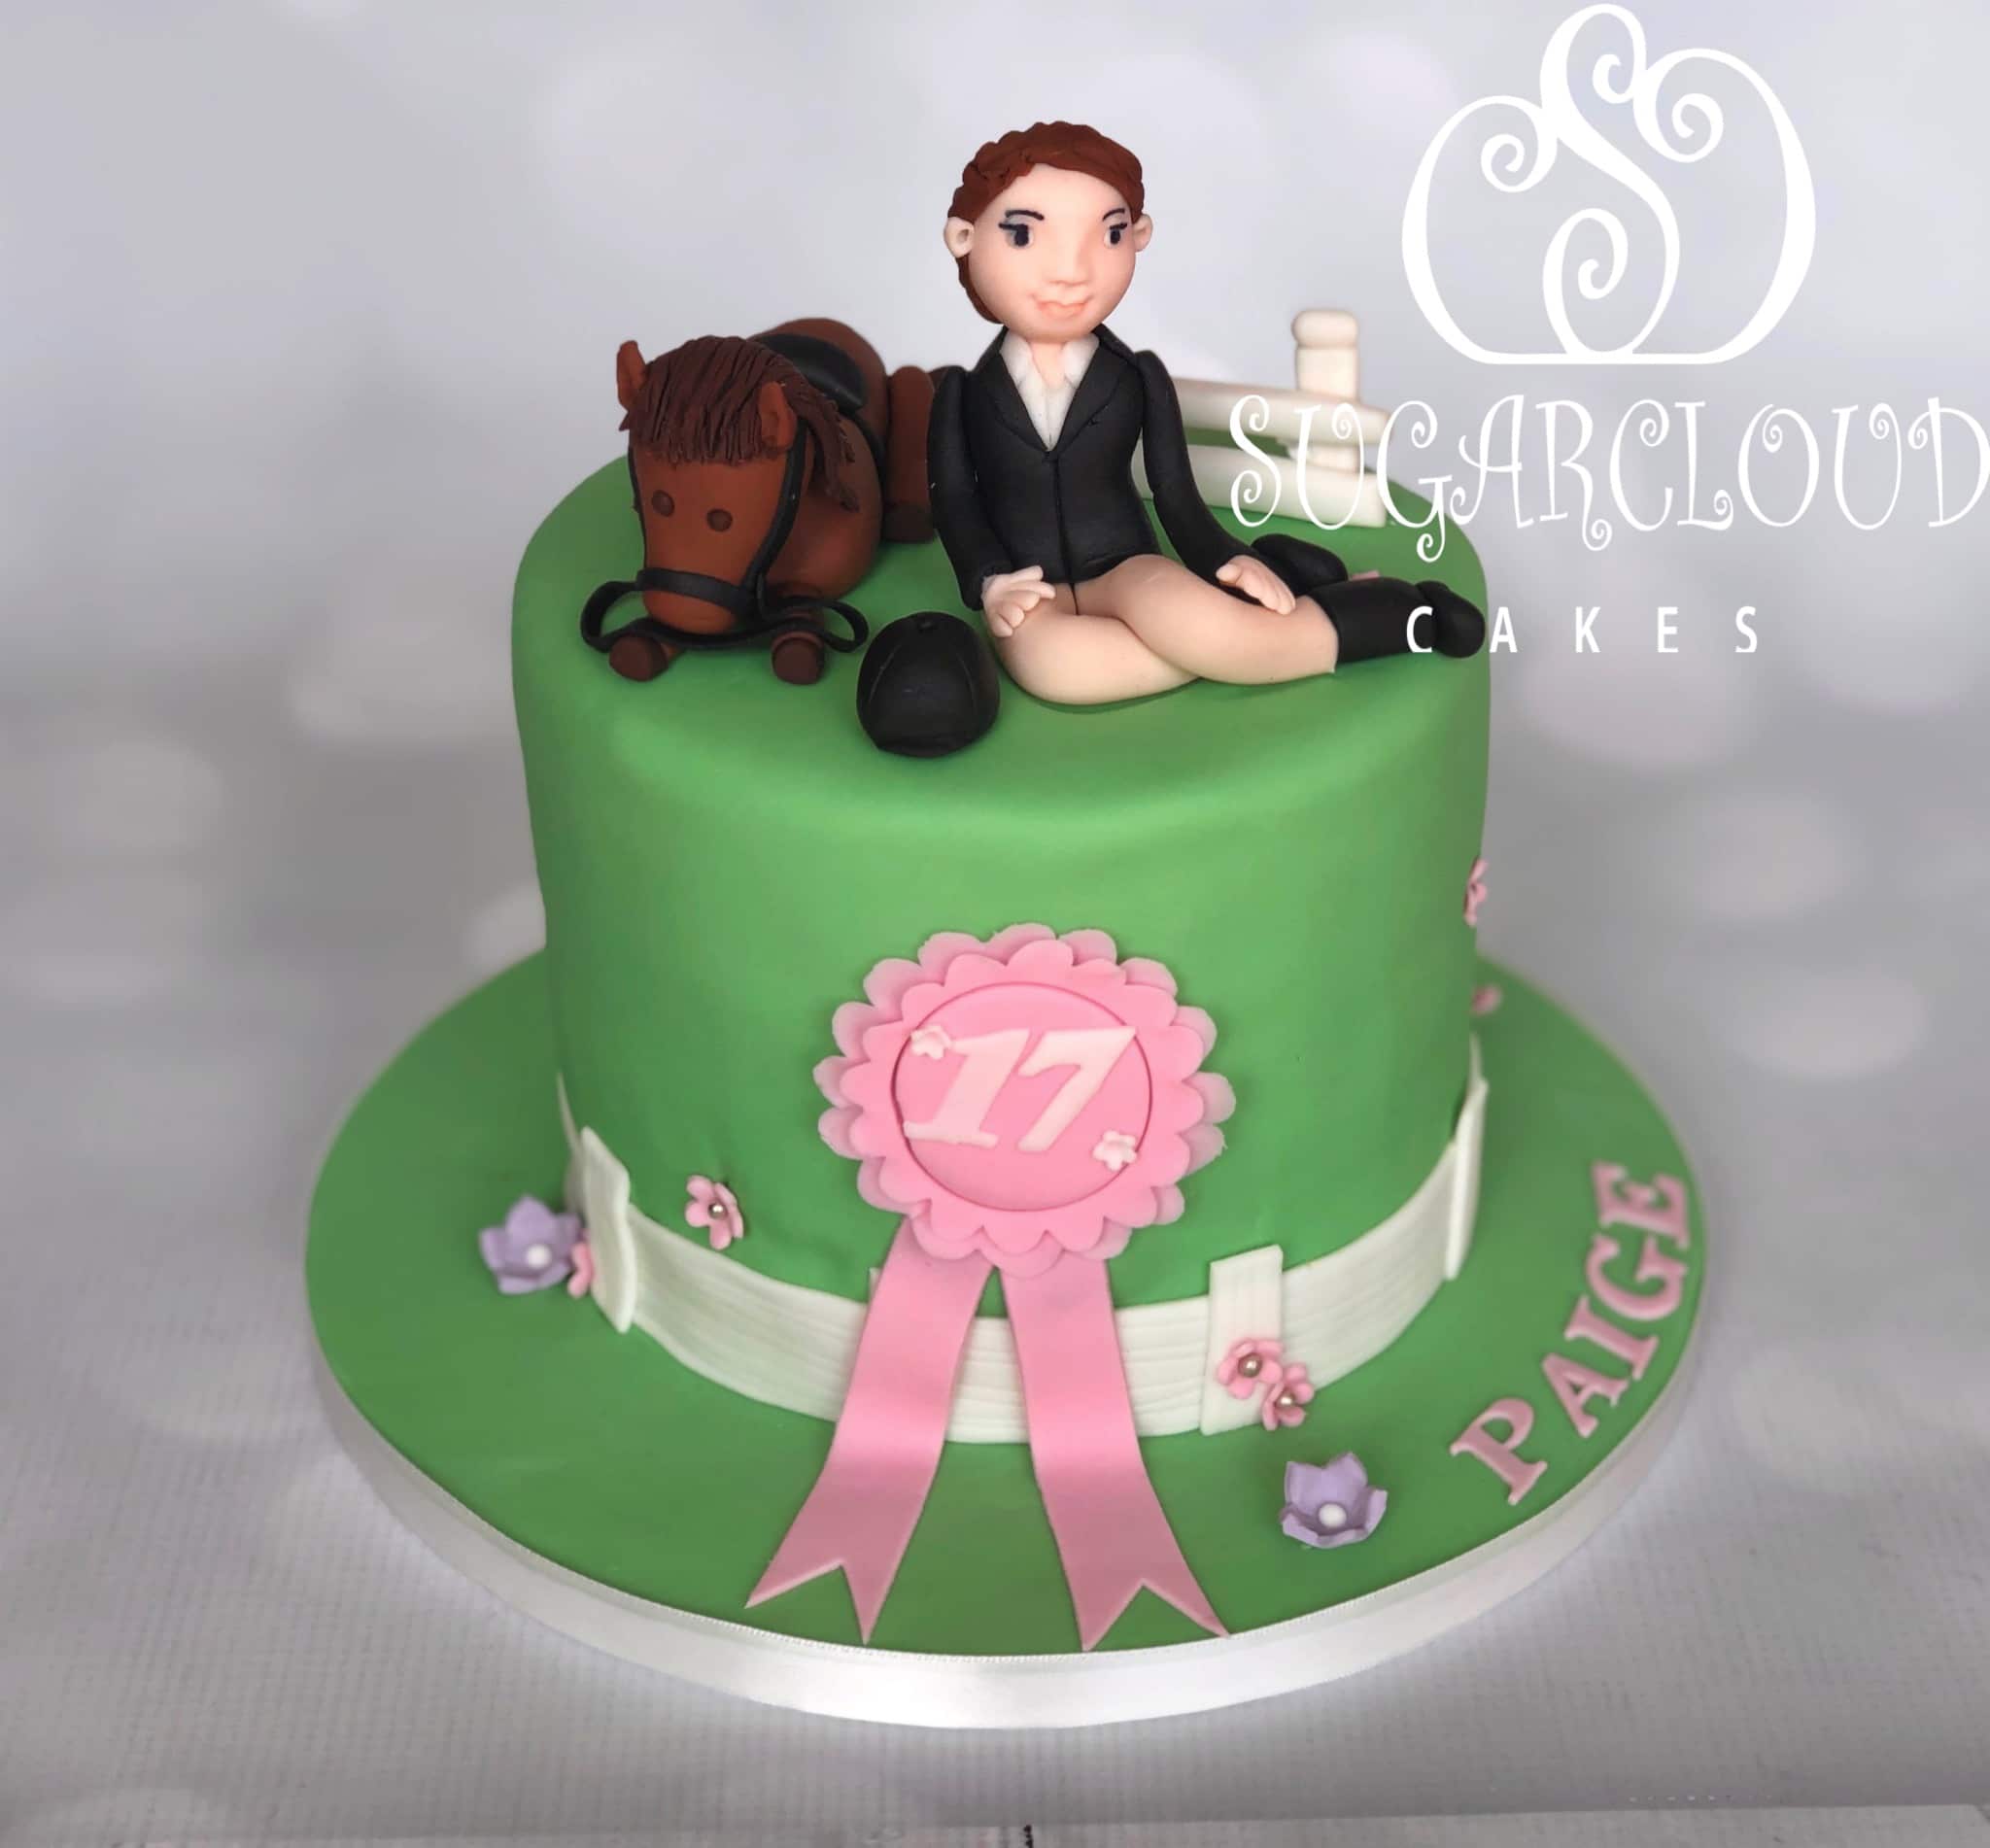 Horse cake - Hayley Cakes and Cookies Hayley Cakes and Cookies